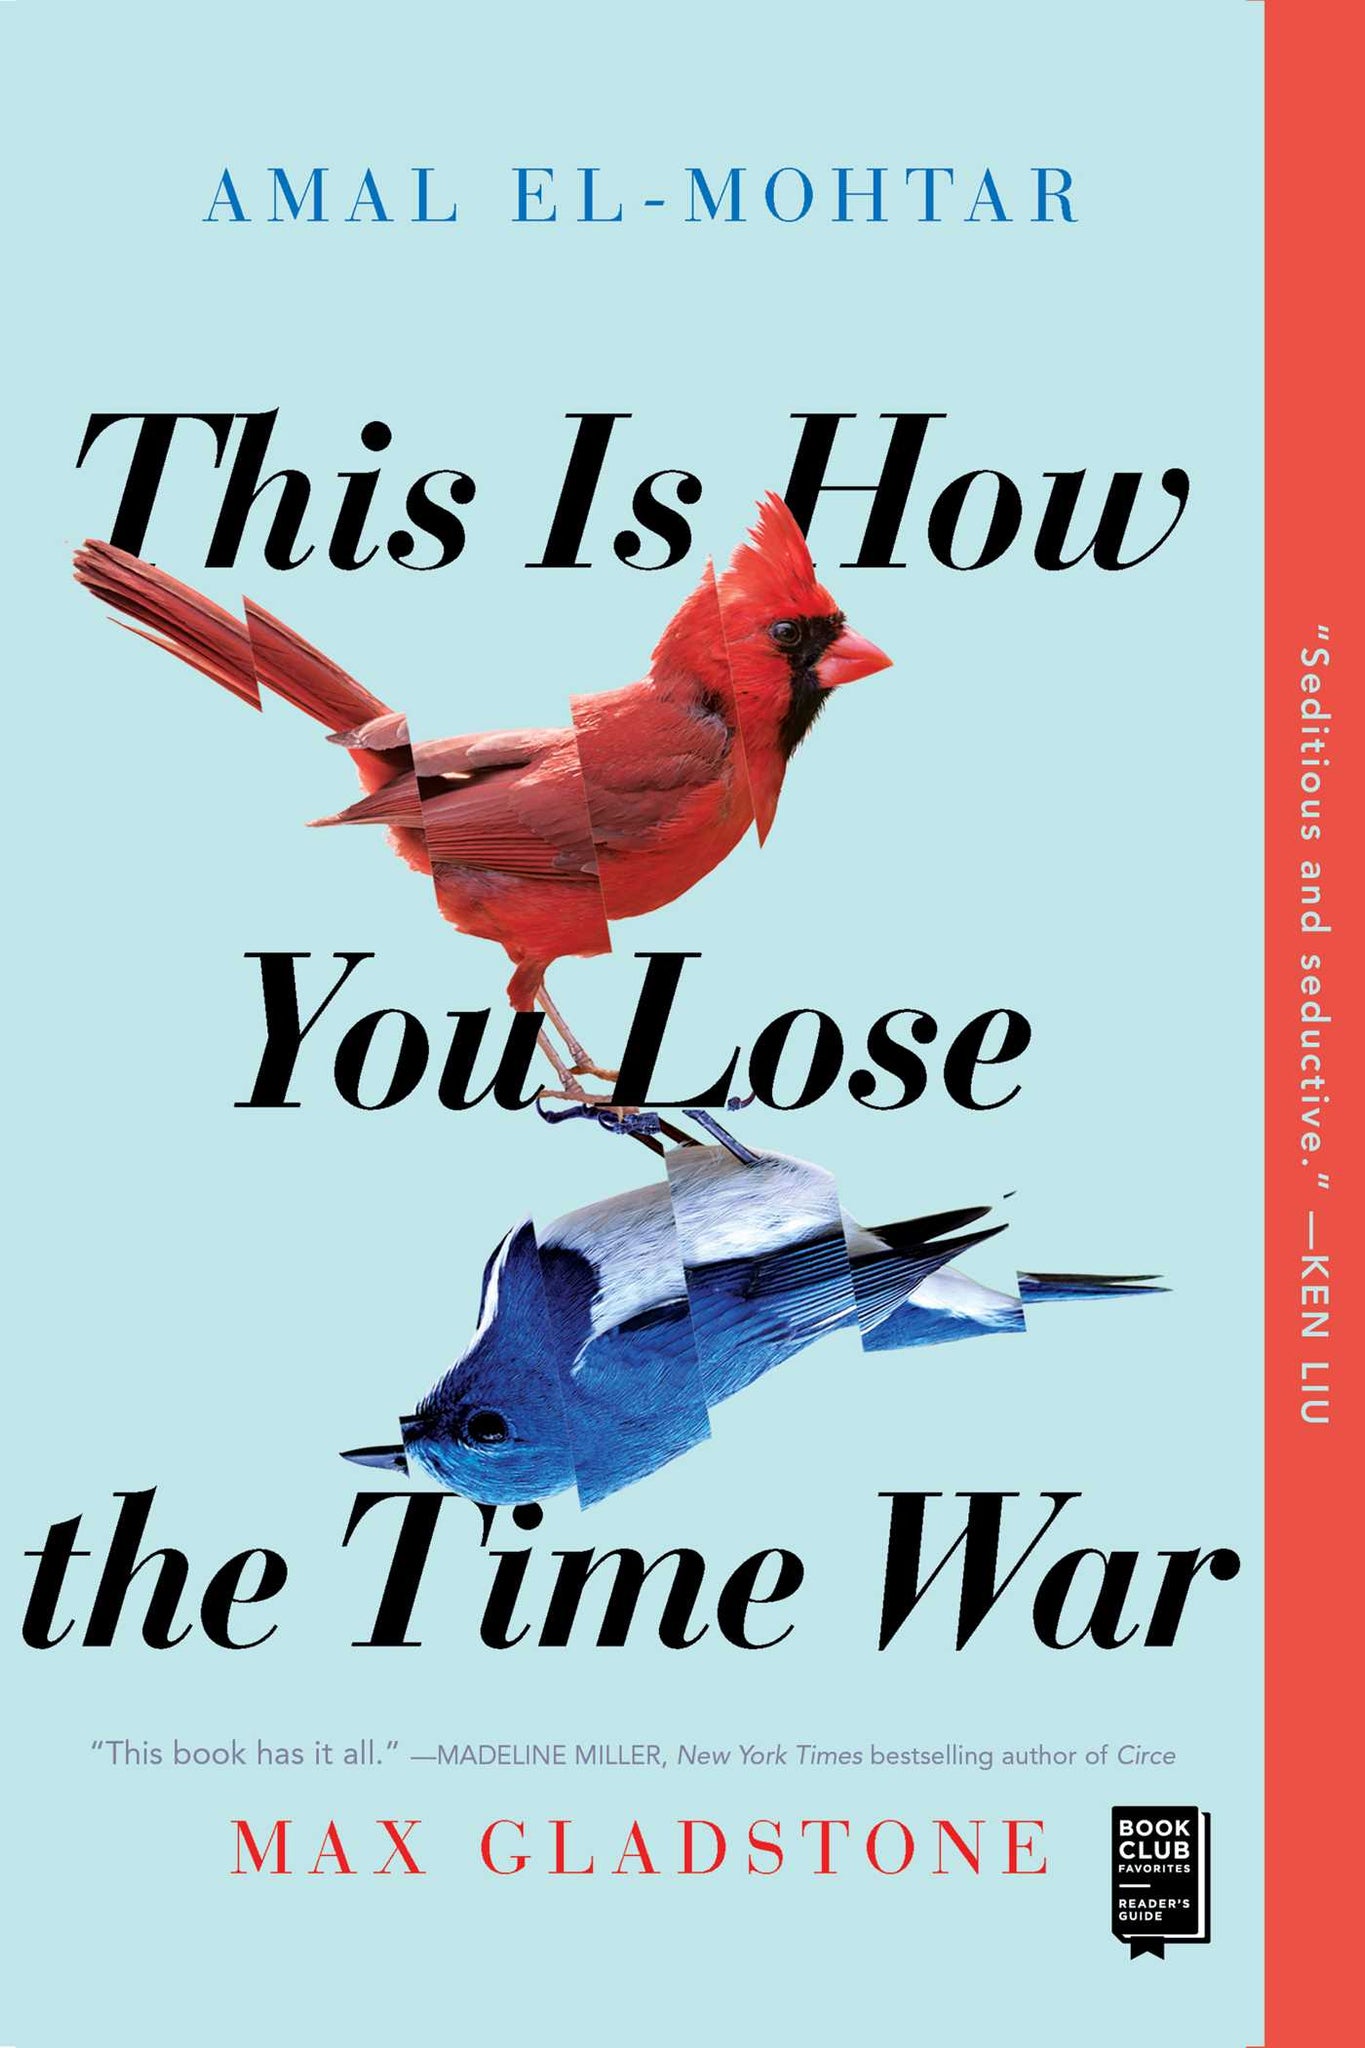 This is How You Lose the Time War - Amal El-Mohtar and Max Gladstone